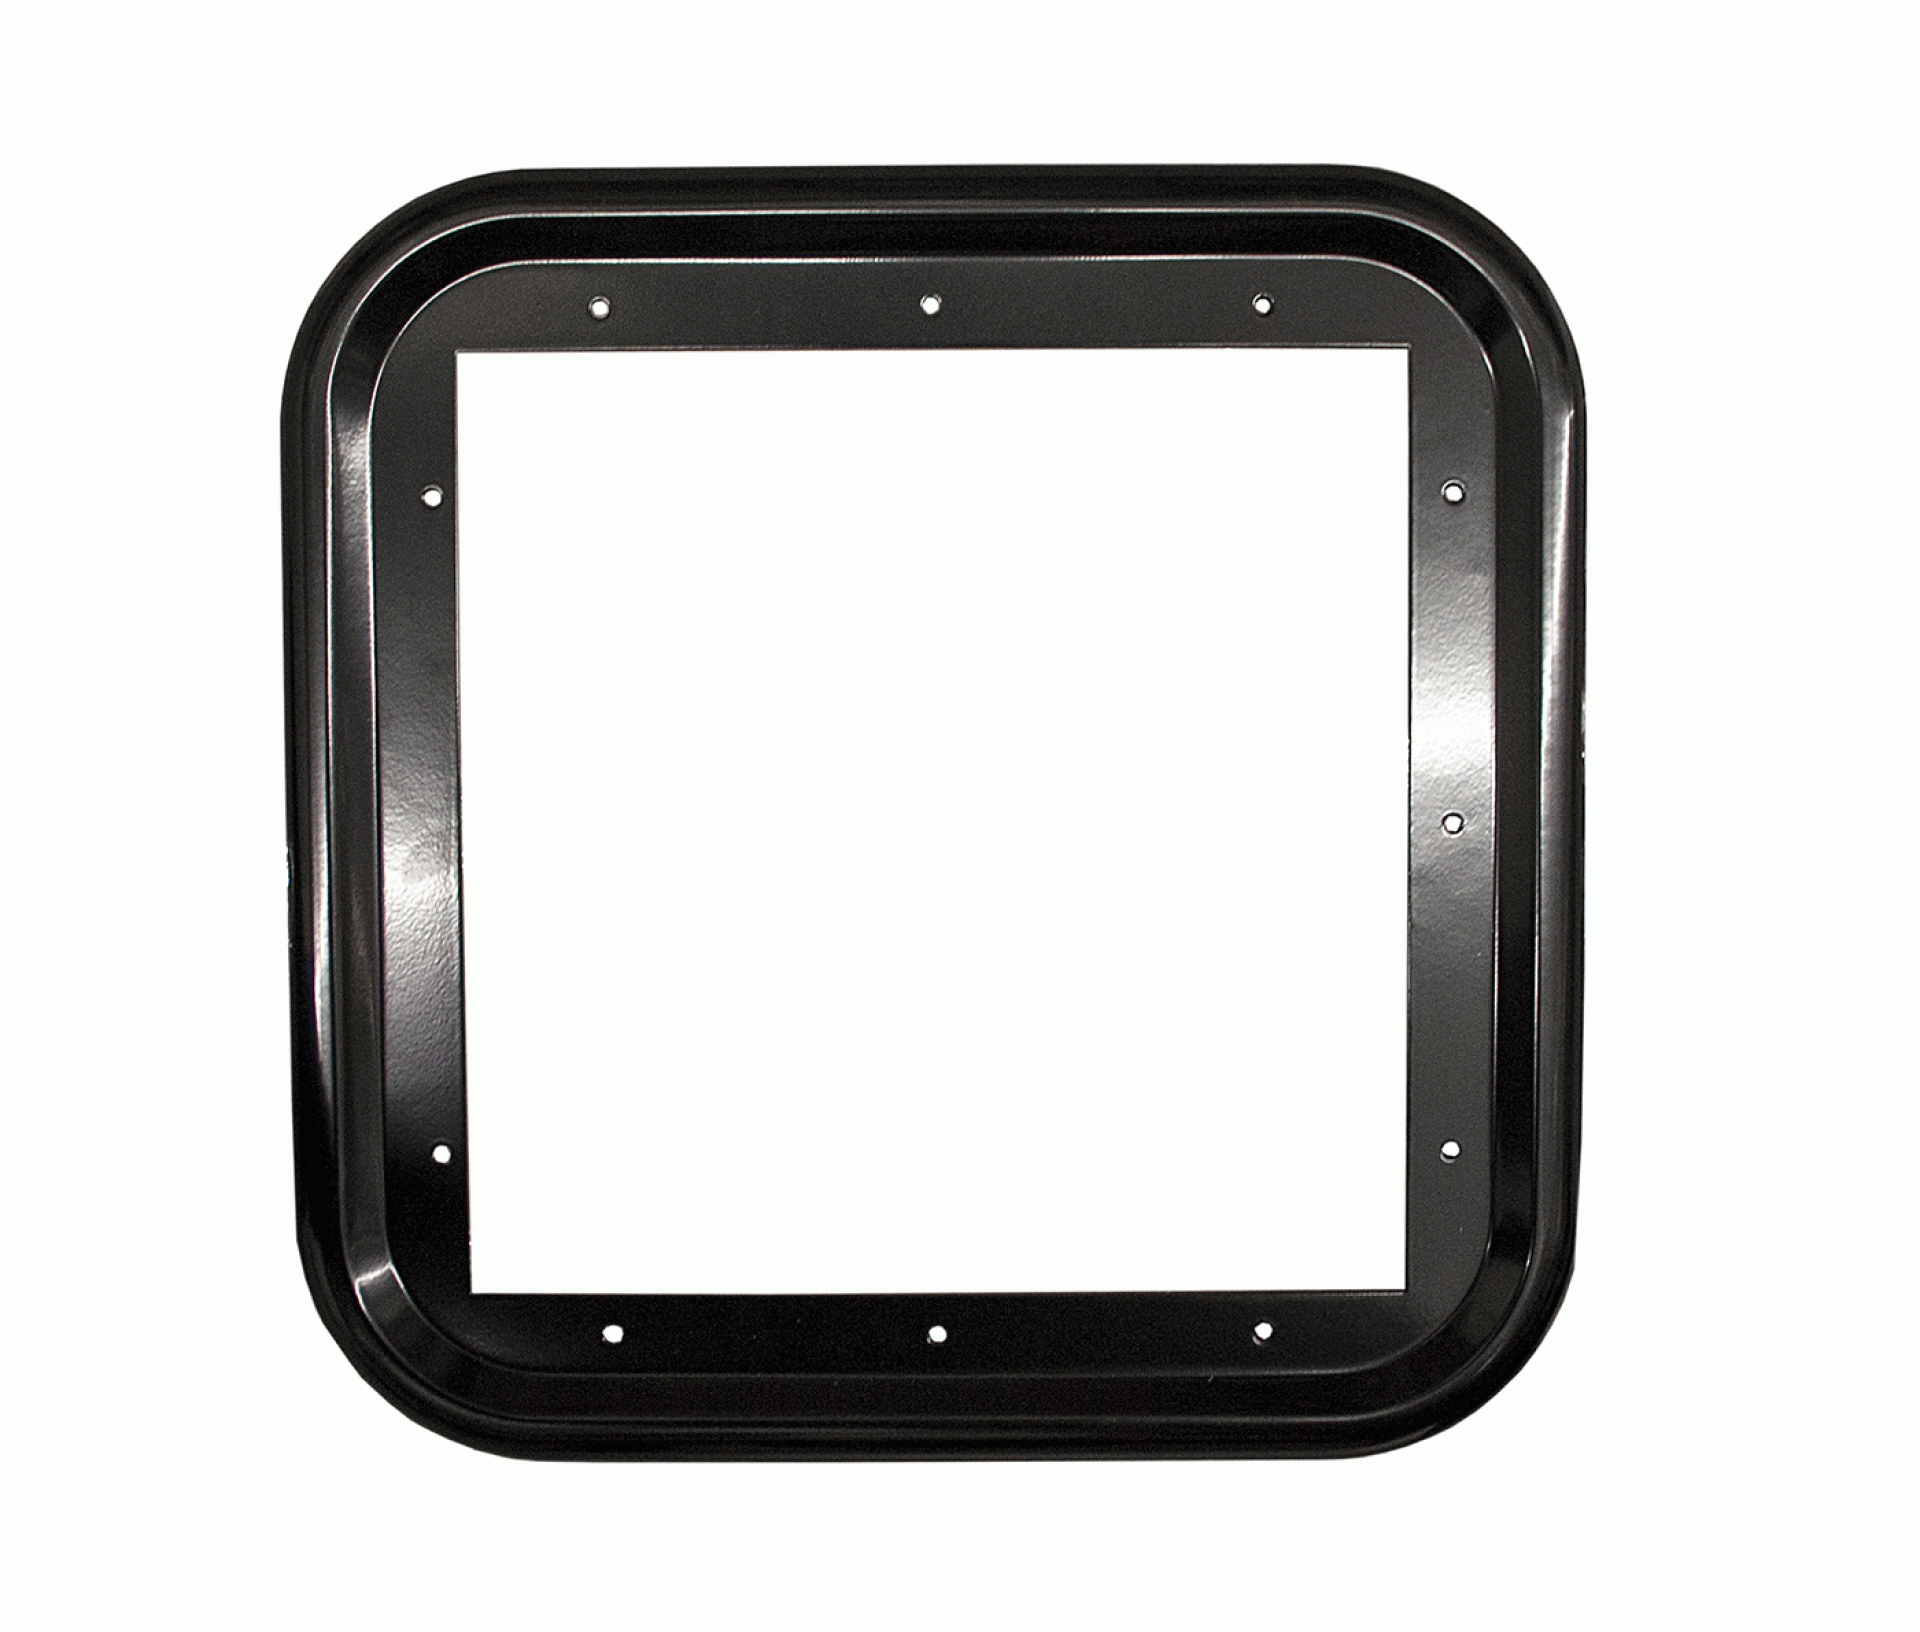 GIRARD PRODUCTS LLC | 2GWHDTR-B | Door Trim Ring For Tankless Water Heater Black